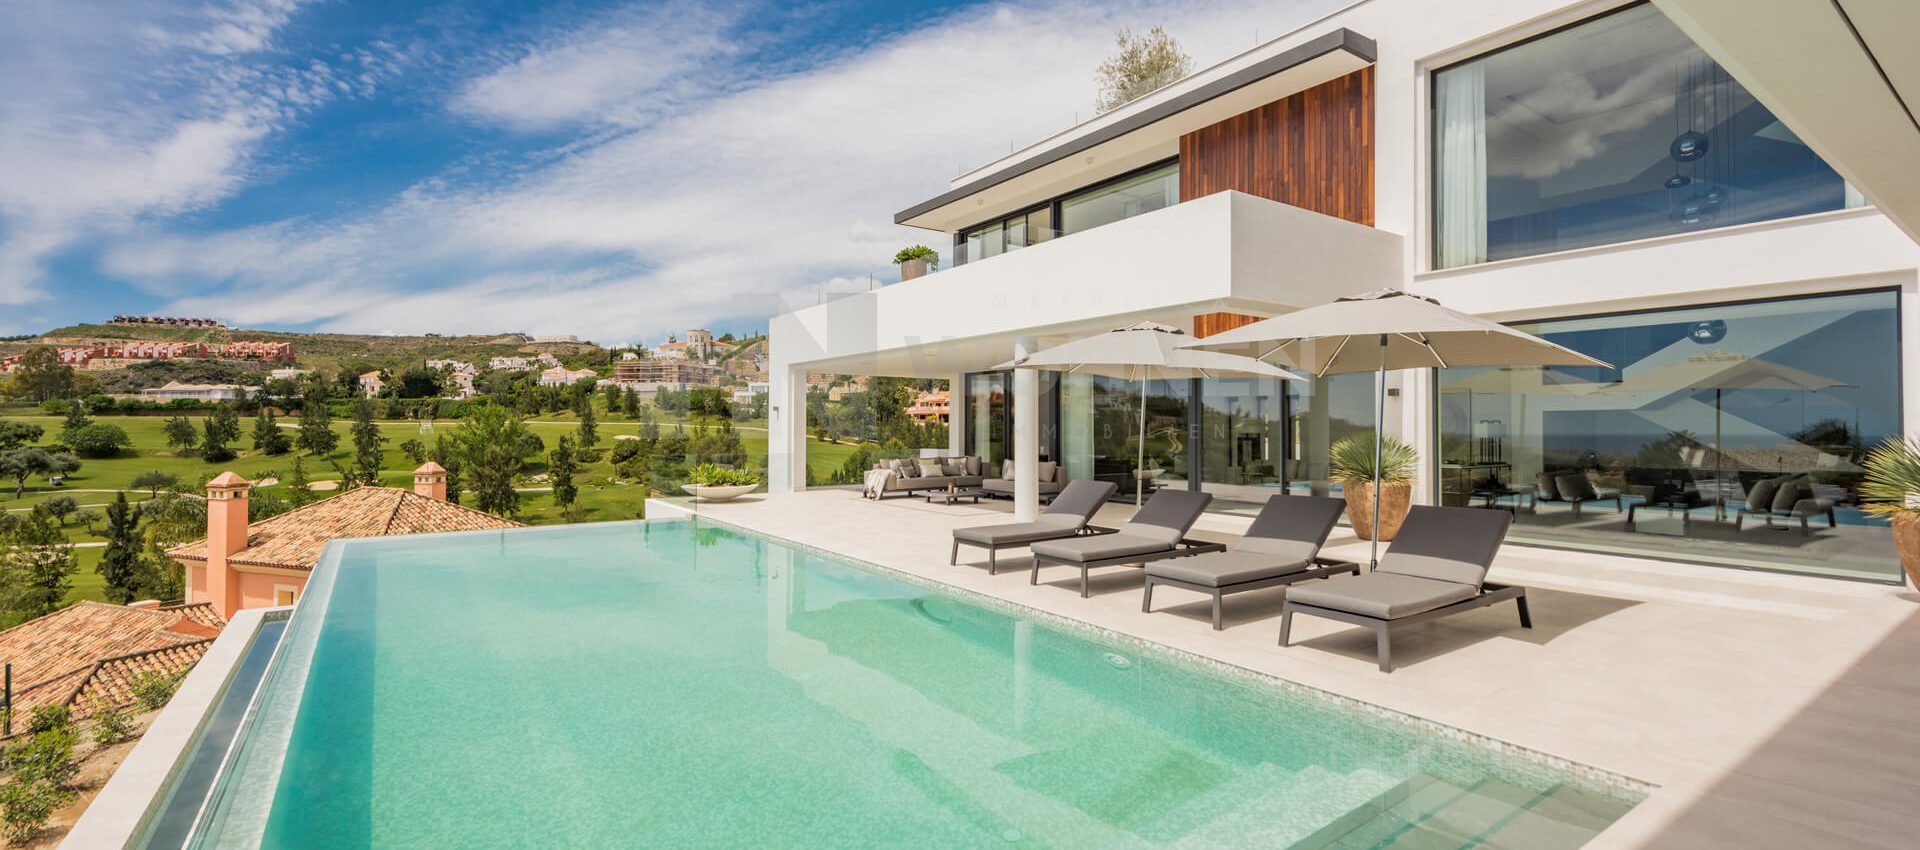 Luxurious villa with breath-taking panoramic views